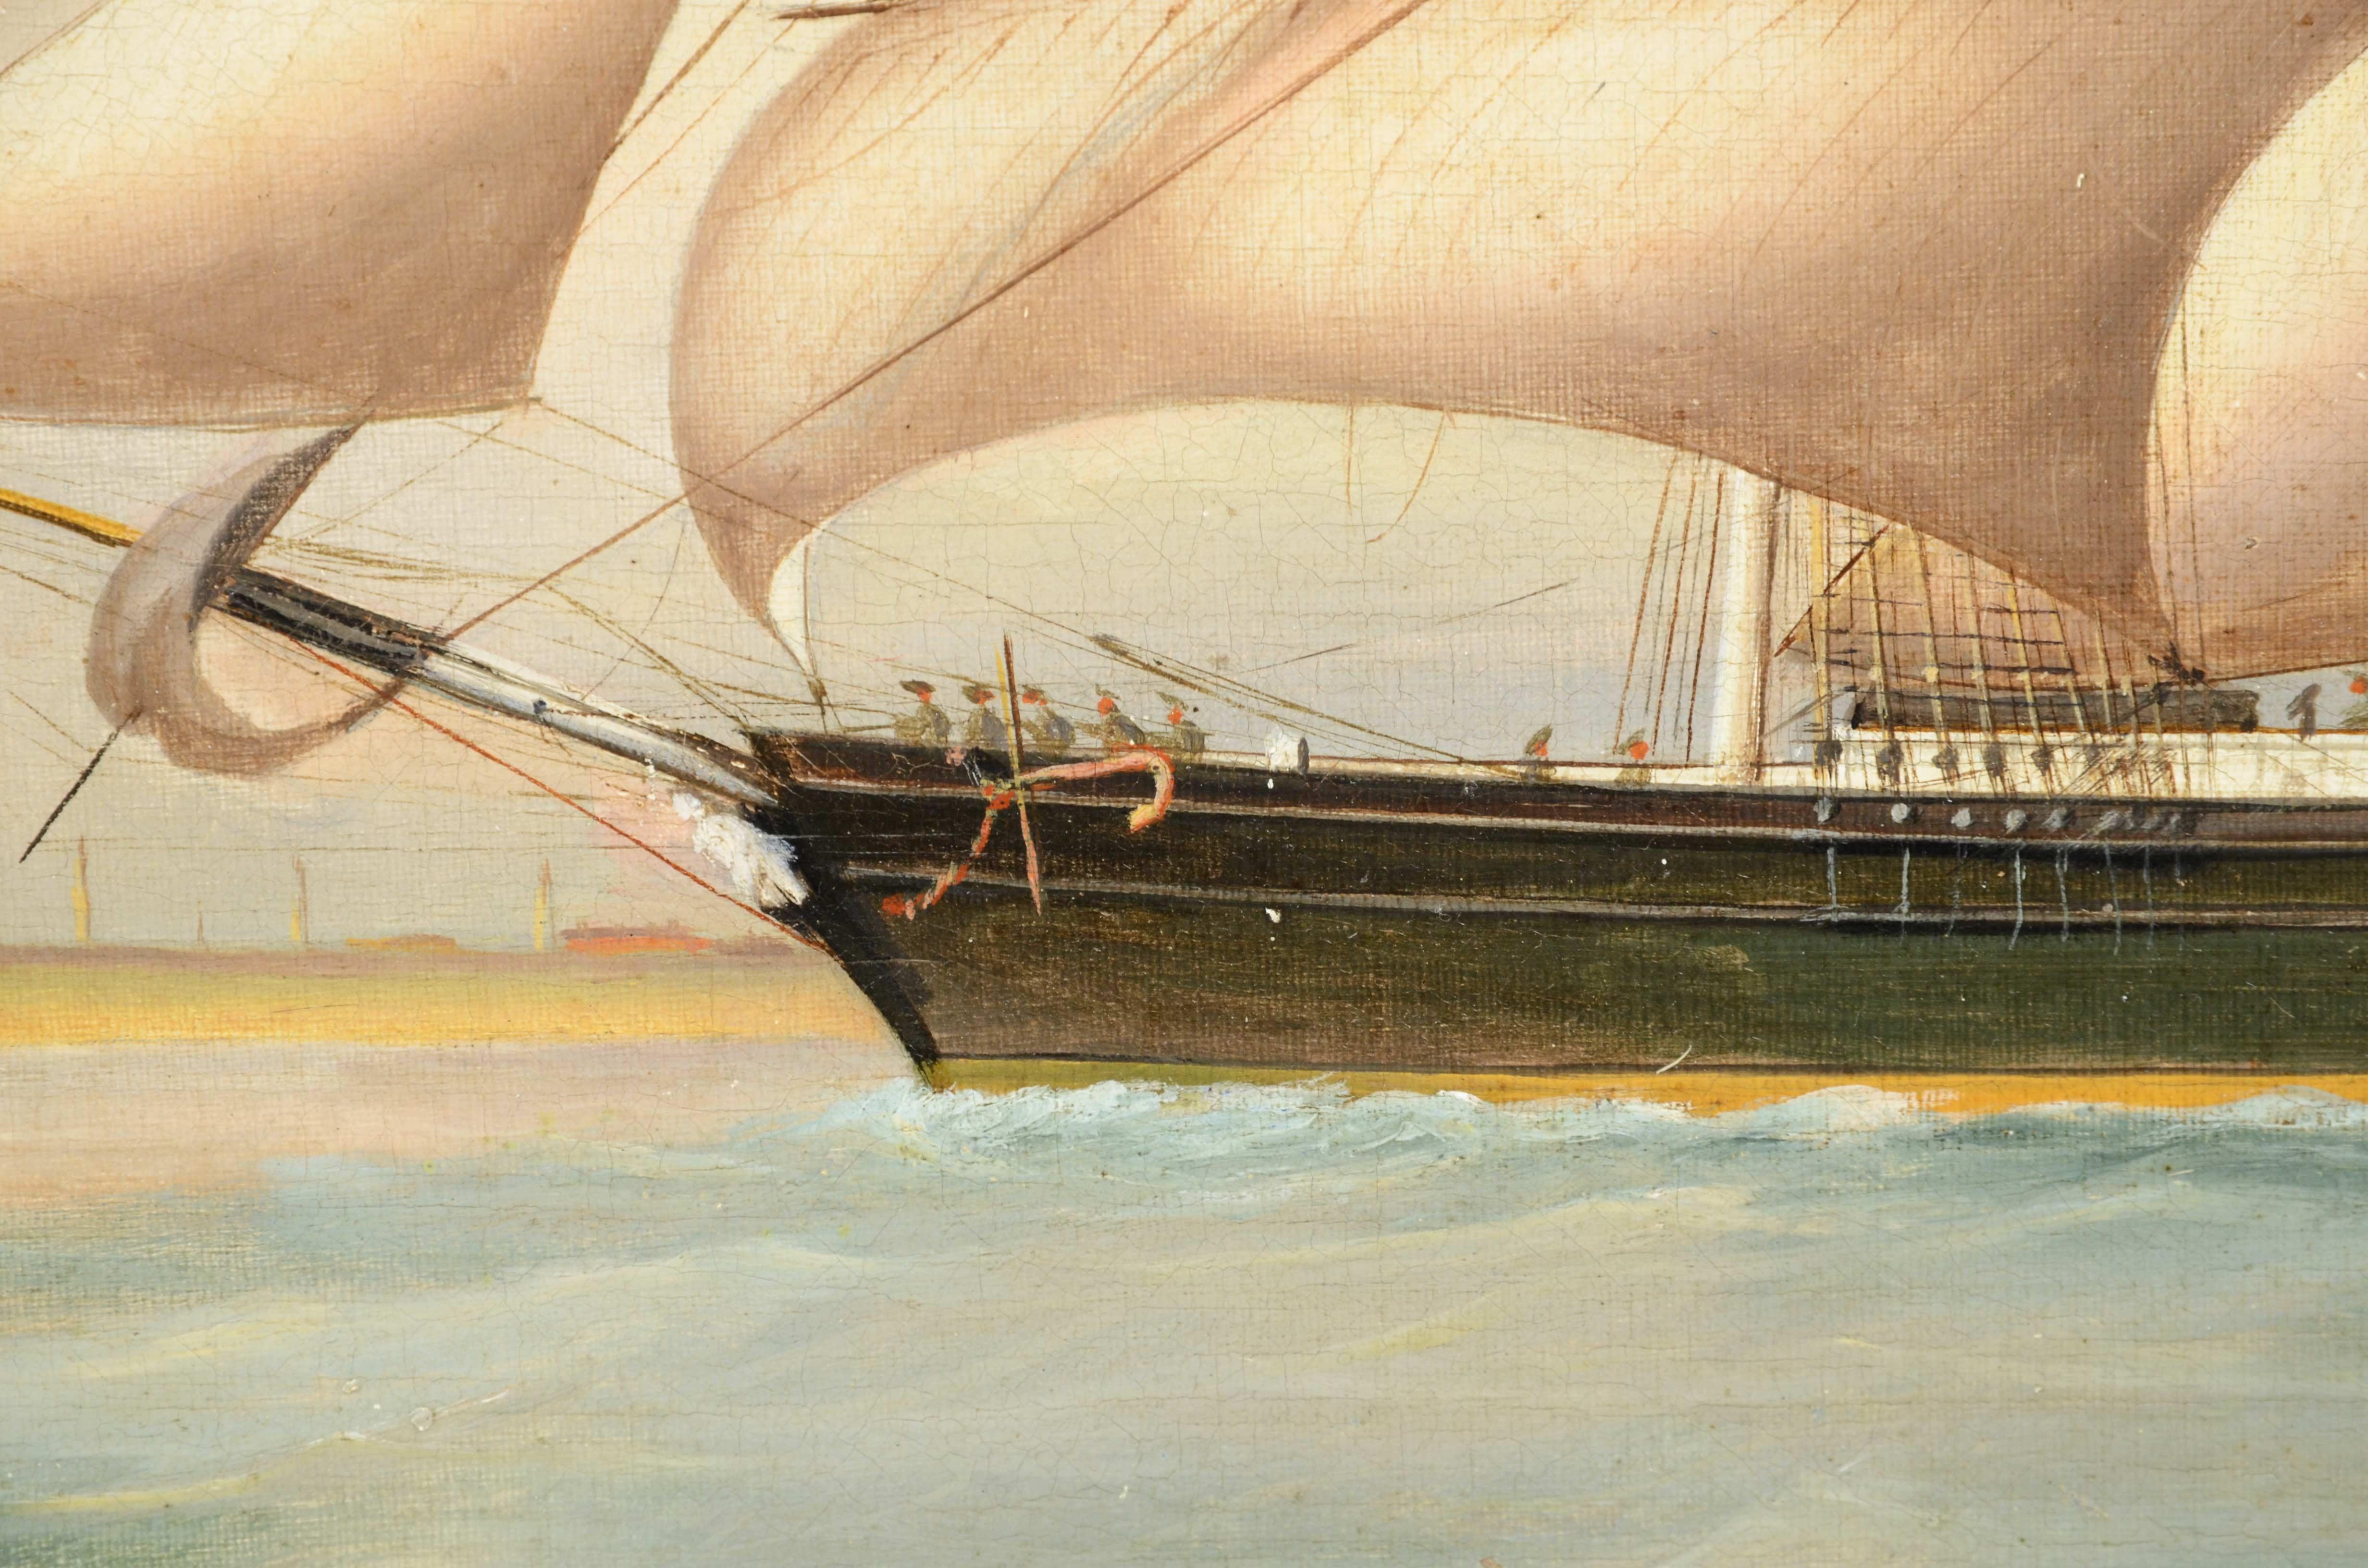 Canvas Oil on canvas, antique portrait of a ship dating from the first half of the 19th century. For Sale